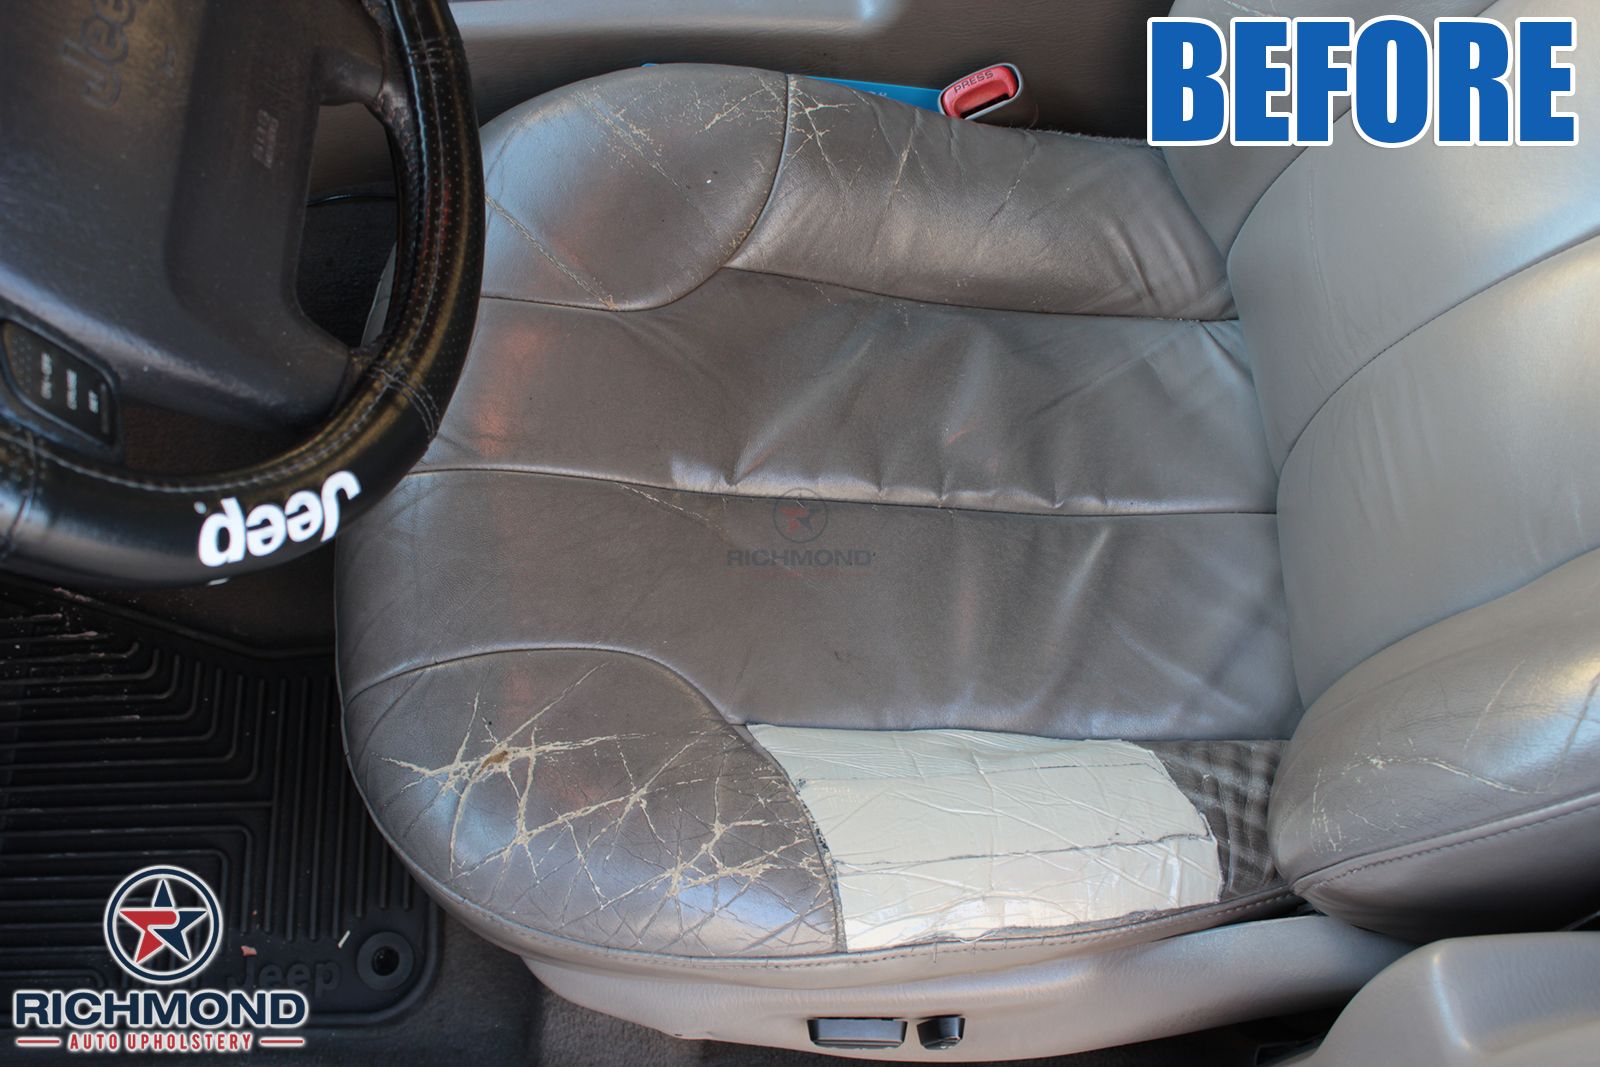 Richmond Auto Upholstery Compatible With 1999 2001 Jeep